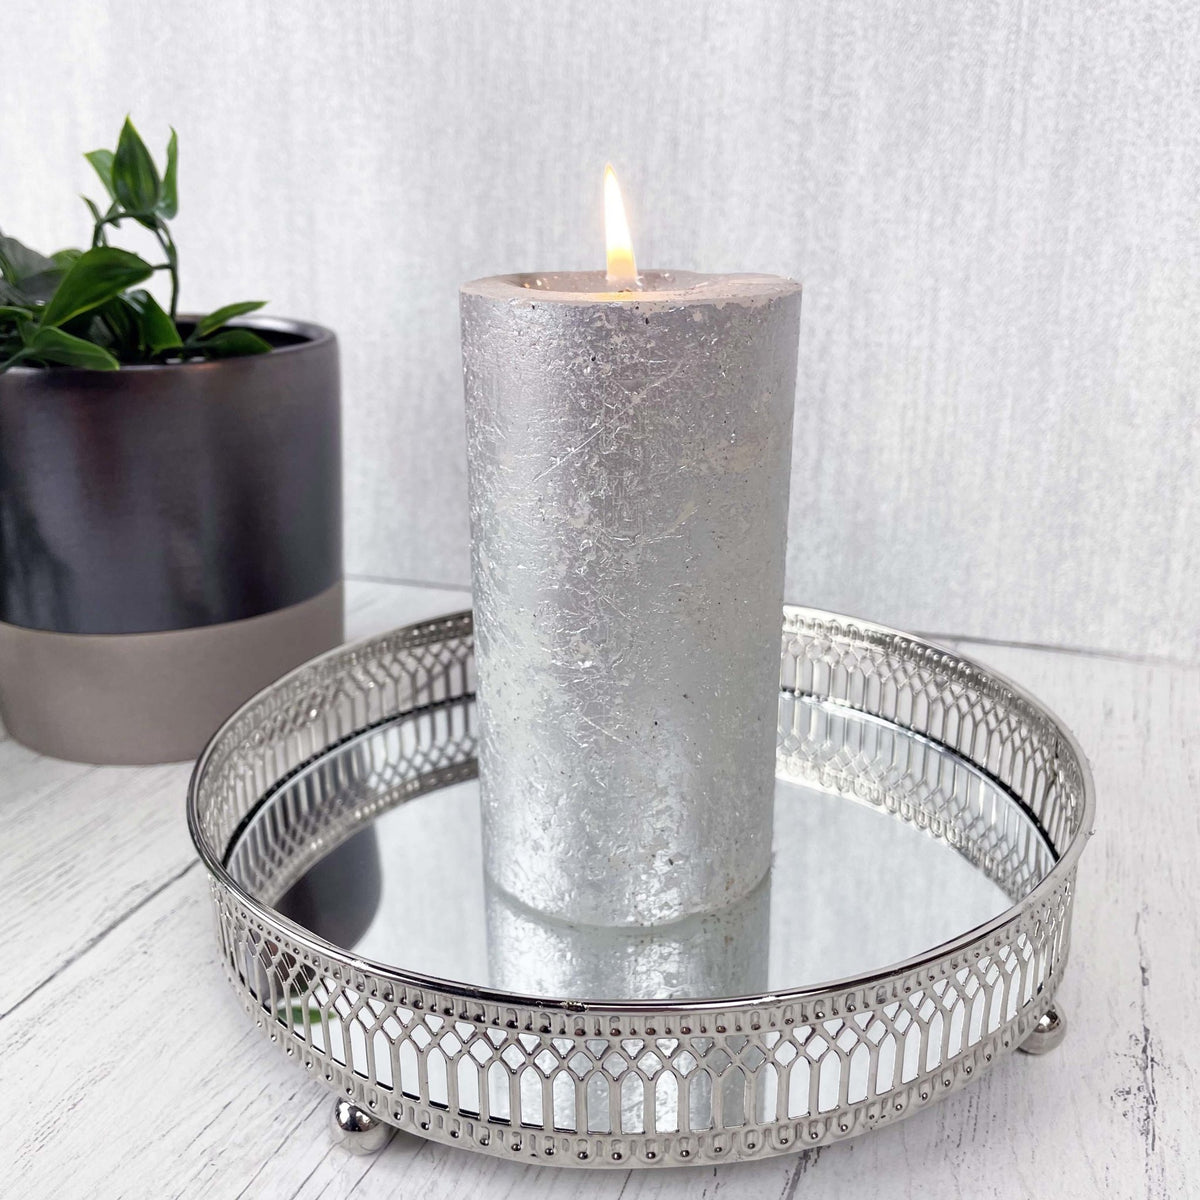 Regiis Silver Style Mirror Tray with silver candle and planter